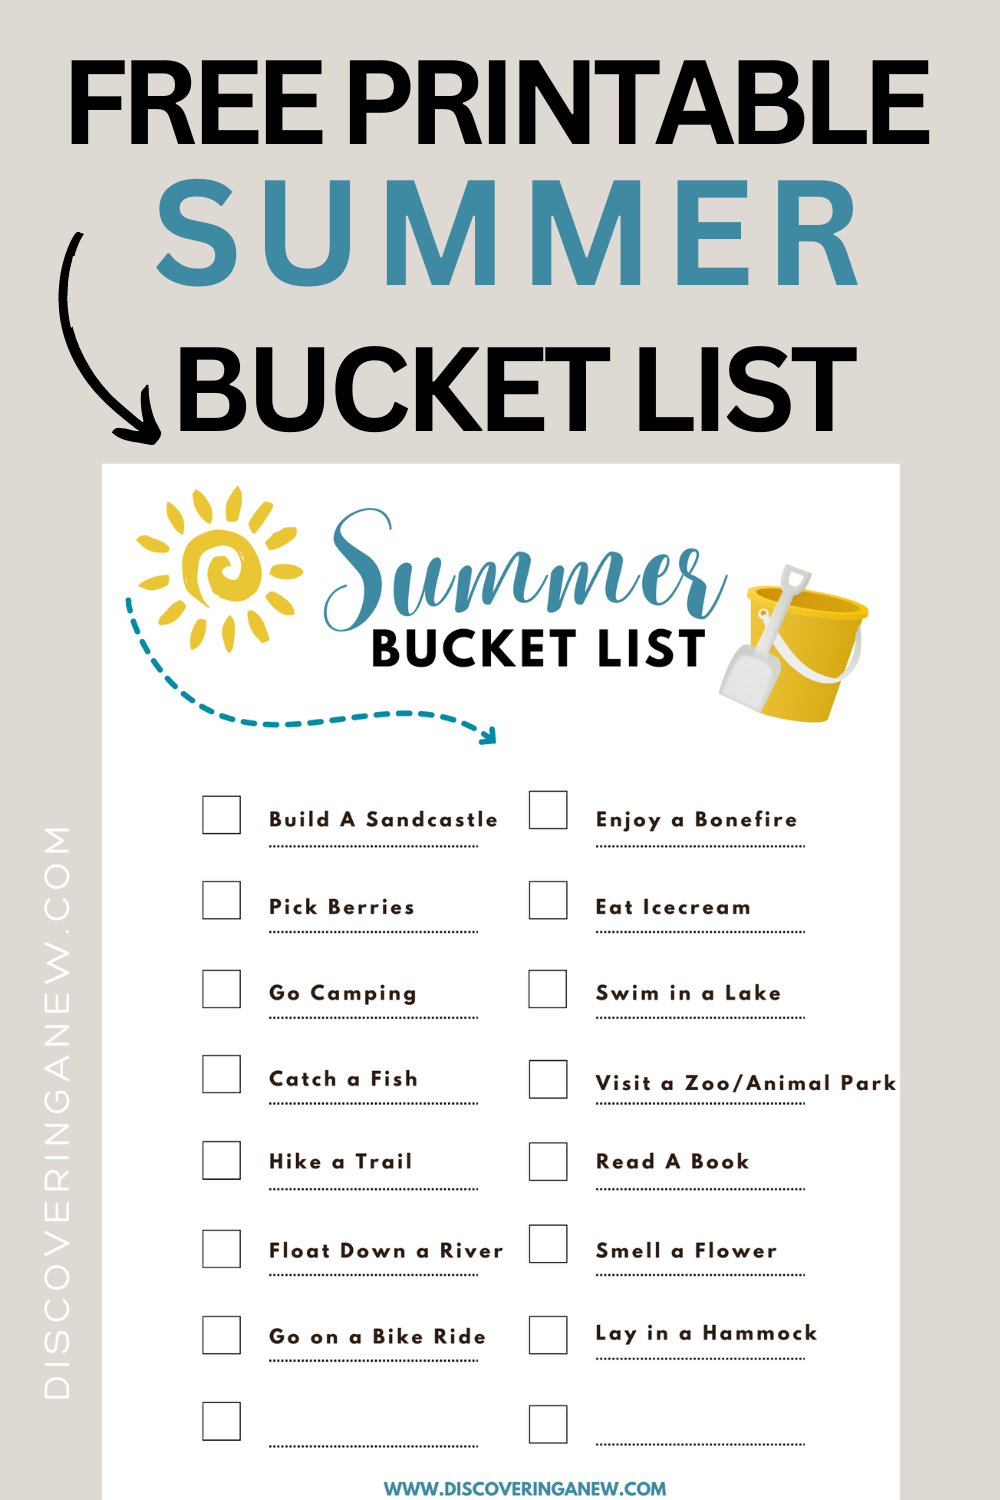 Summer Bucket List (+free printable) — discovering anew